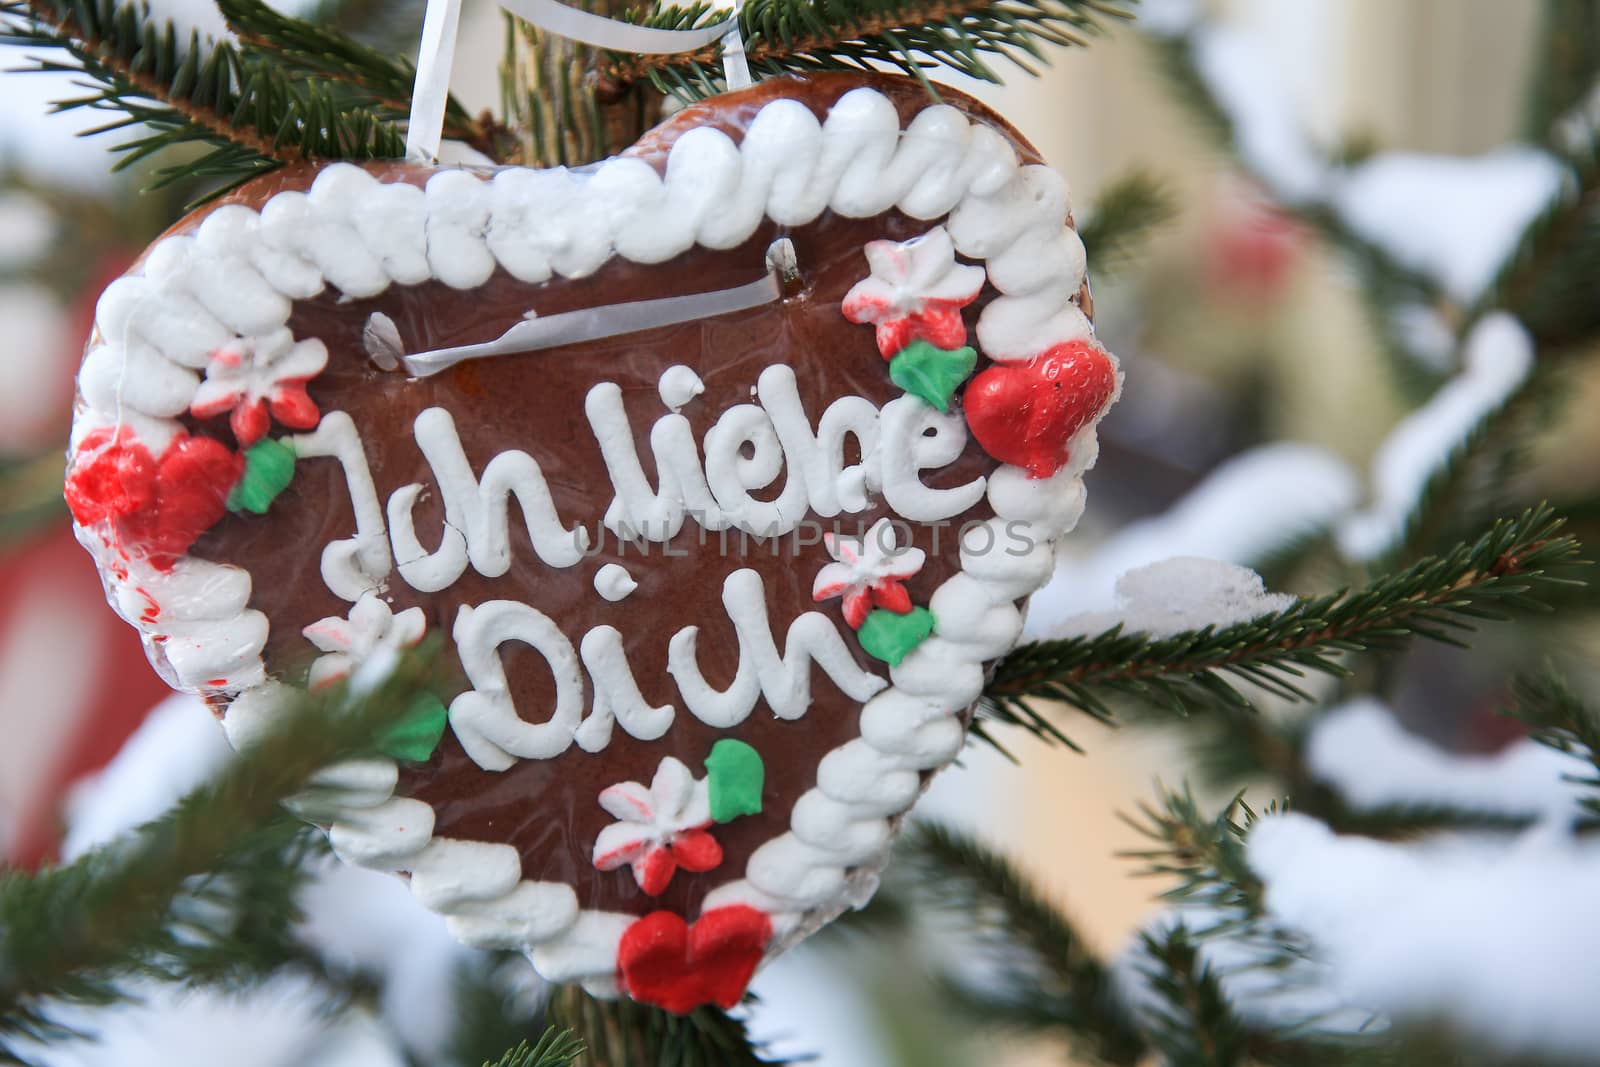 German gingerbread heart with the words "Ich liebe dich" translates into "I love you" in English by Kasparart